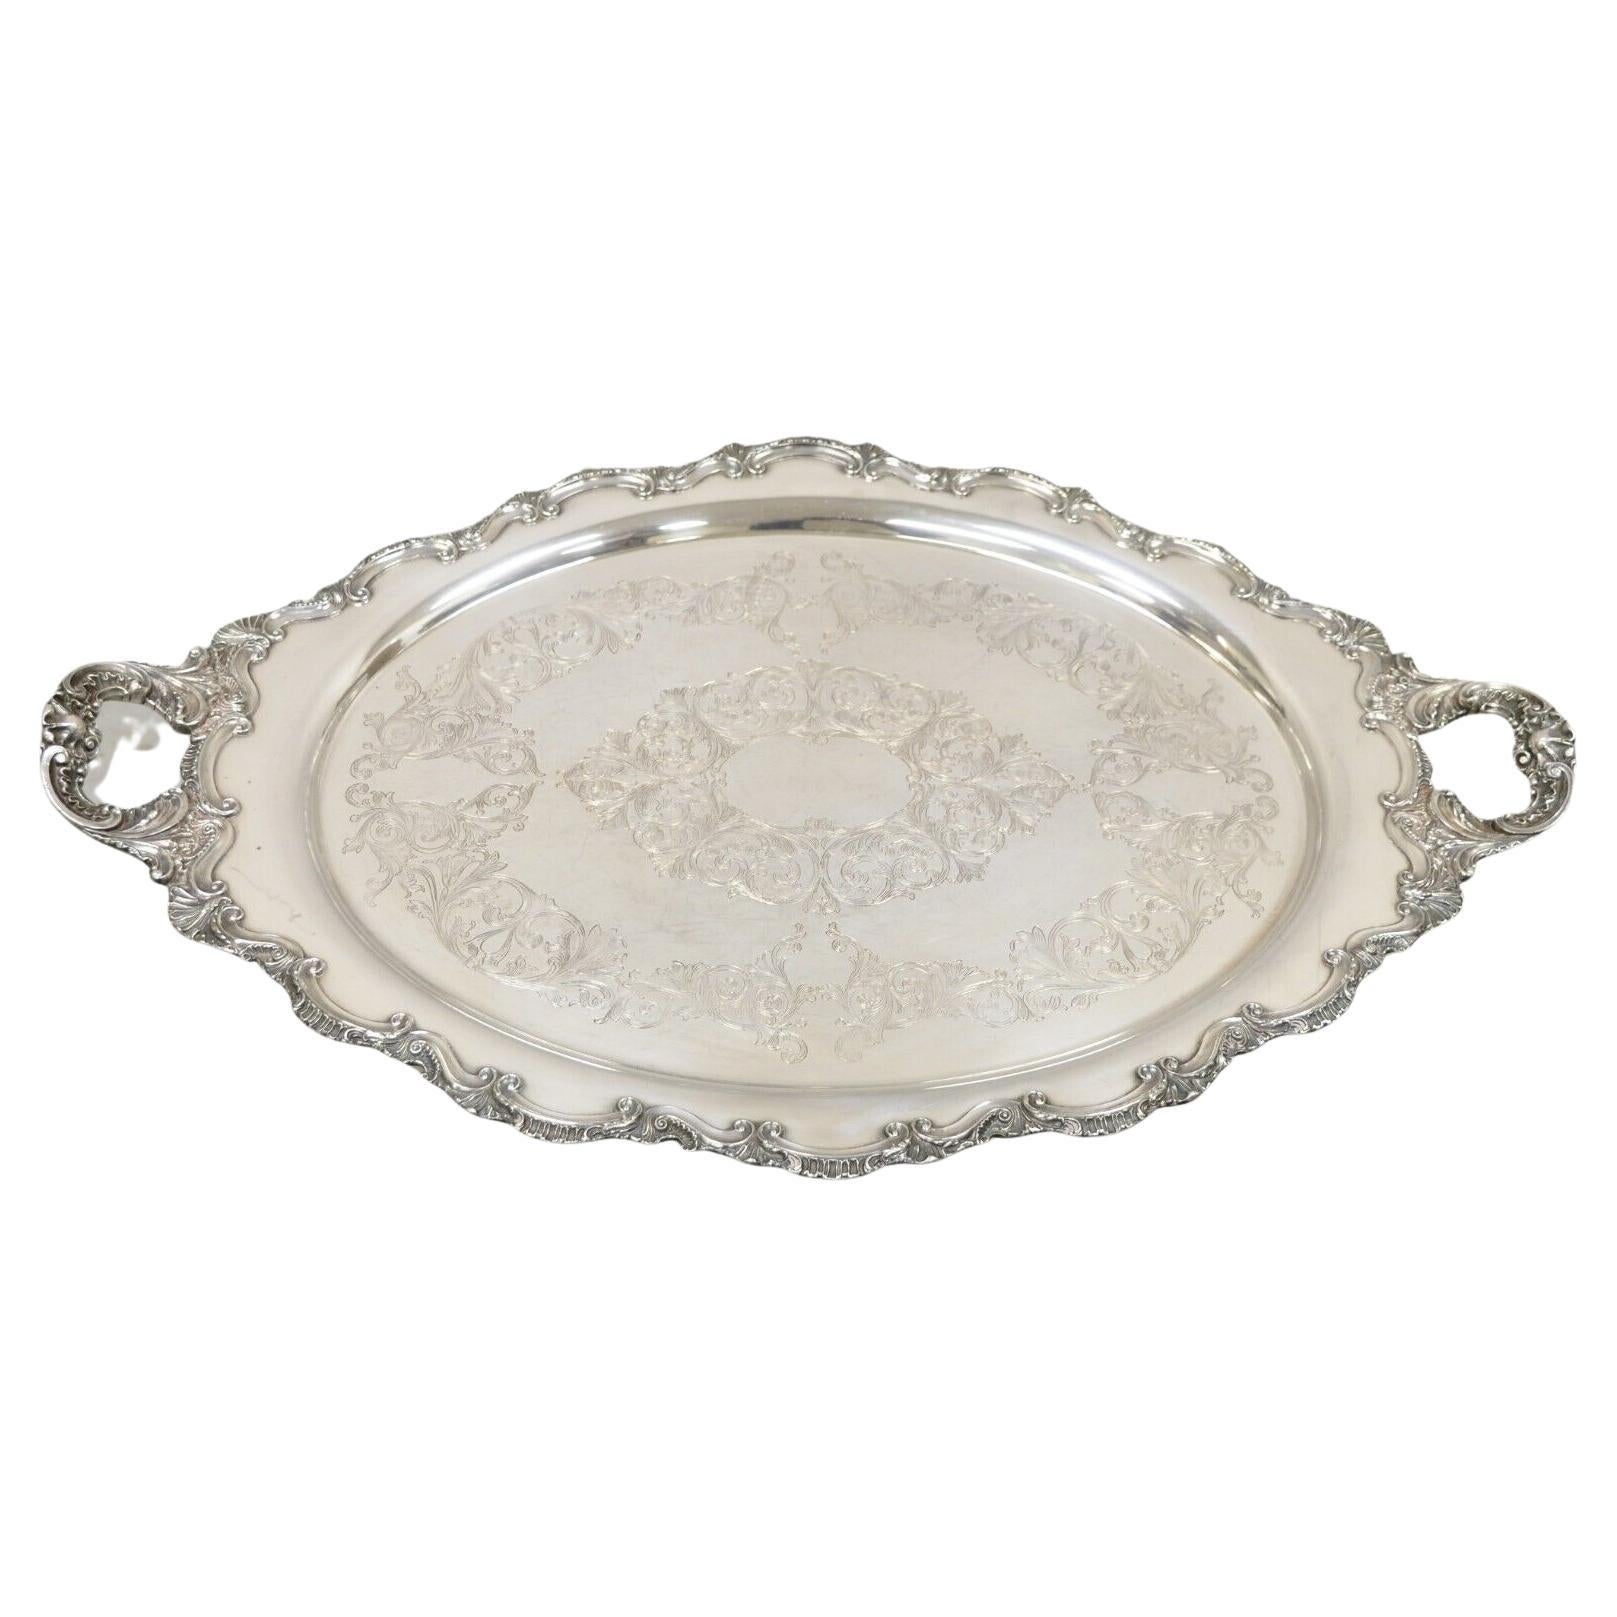 Antique Victorian Silver Plated English Large Oval Fancy Serving Platter Tray